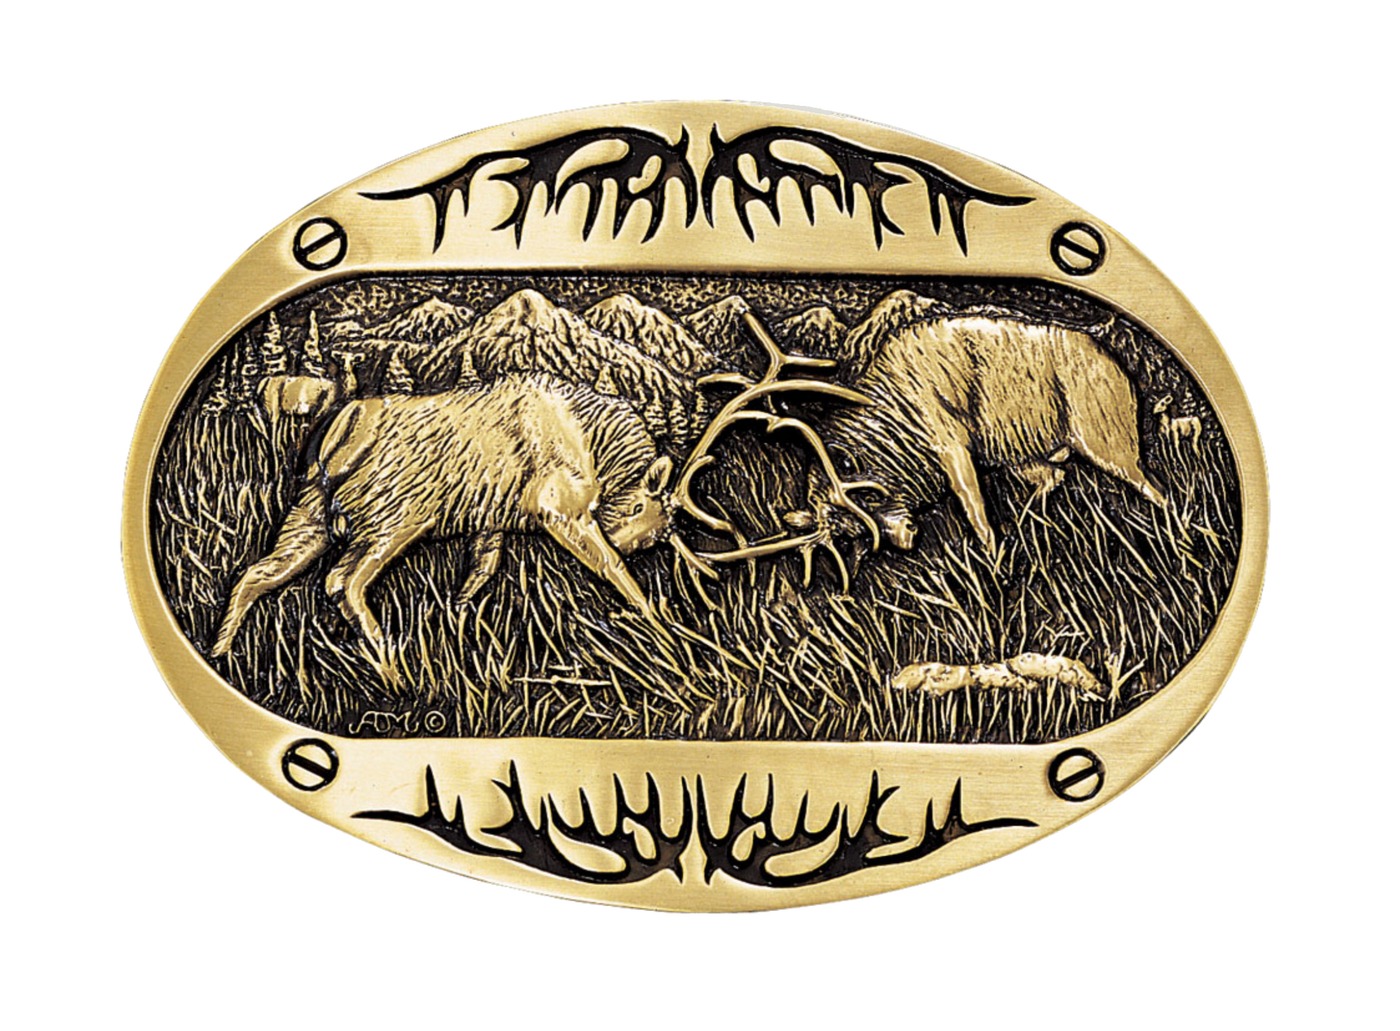 Brass colored oval Montana Silversmith's Attitude series buckle with rutting elk and antler designs at the top and bottom. Standard 1.5 belt swivel.  Amazing detail of 2 Elk fighting with their heads down with a mountain scene background Available at our shop just outside Nashville in Smyrna, TN. Dimensions: Width 3.63" Height 2.75" Length 0.16"